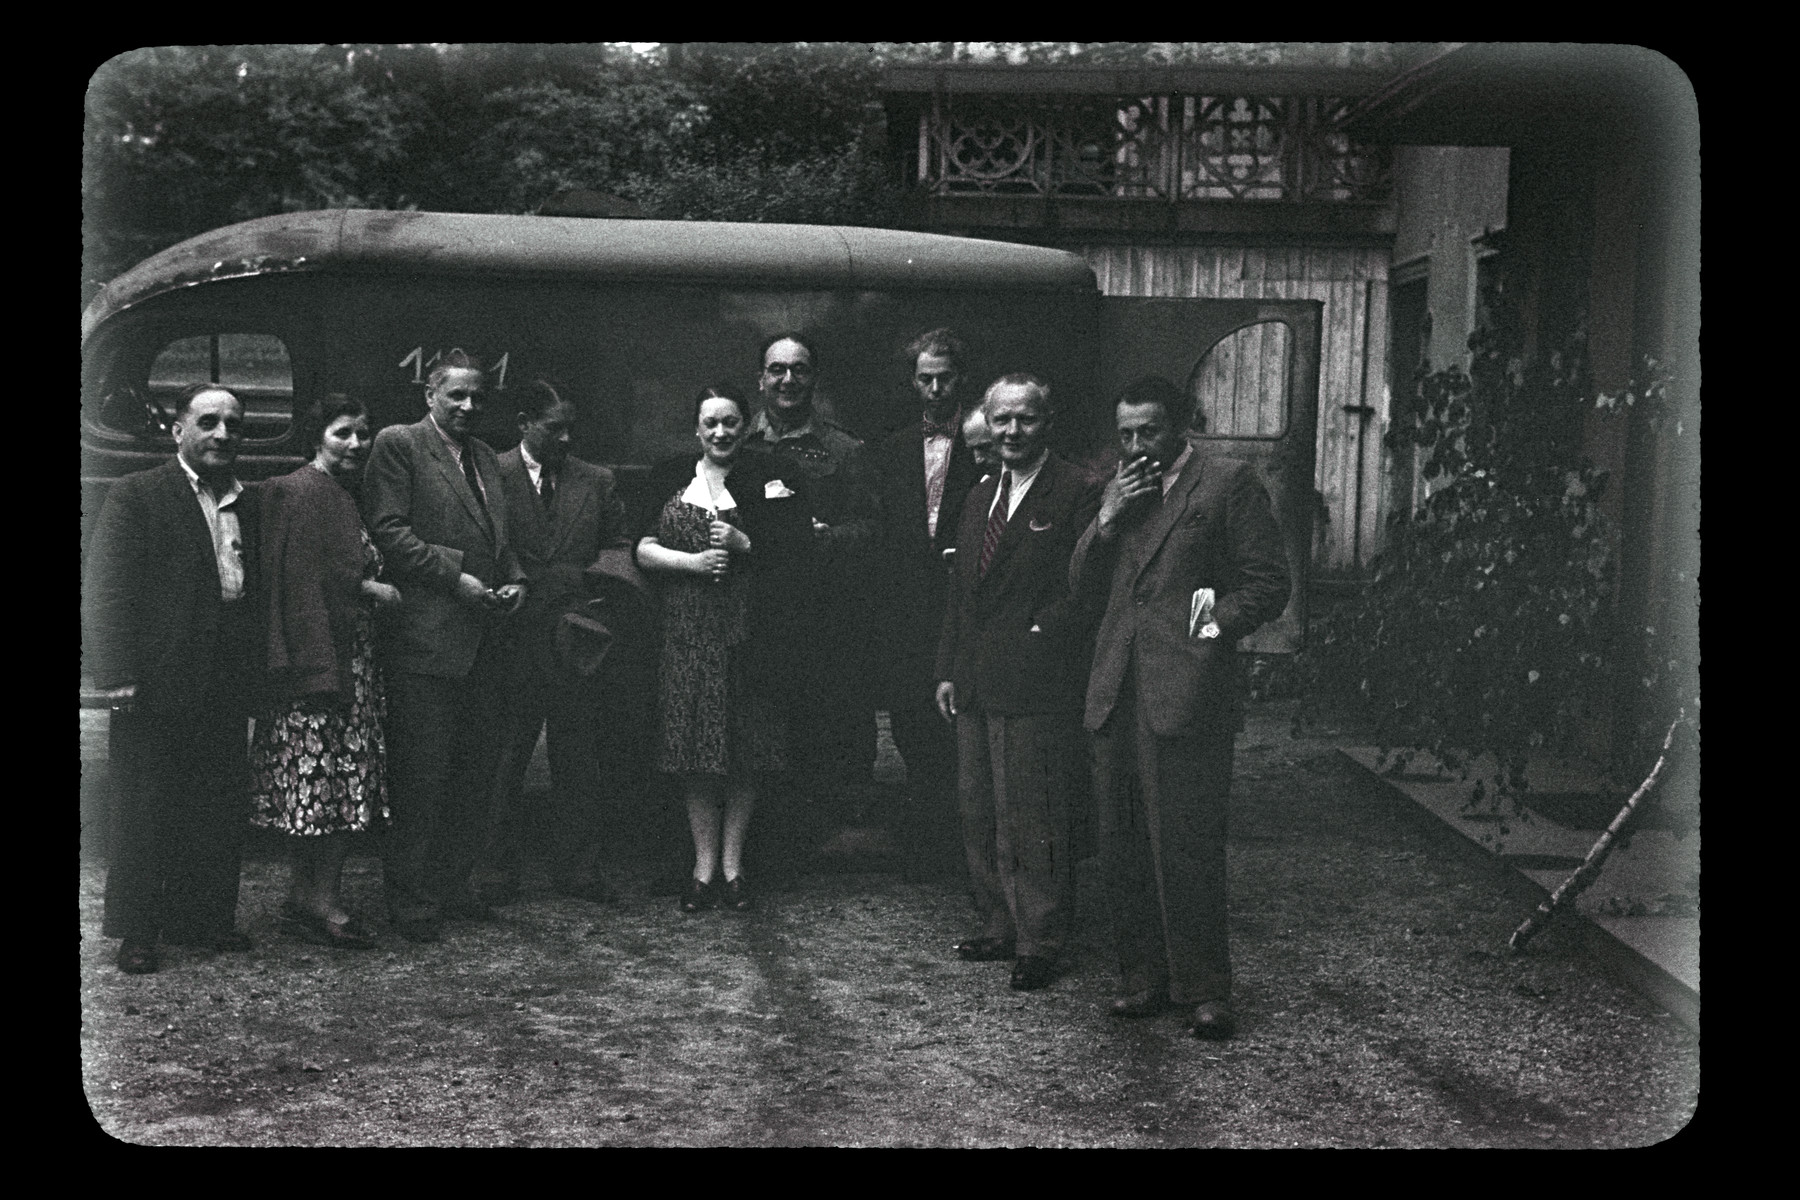 Group portrait of people posing in front of a bus in Upper Silesia.